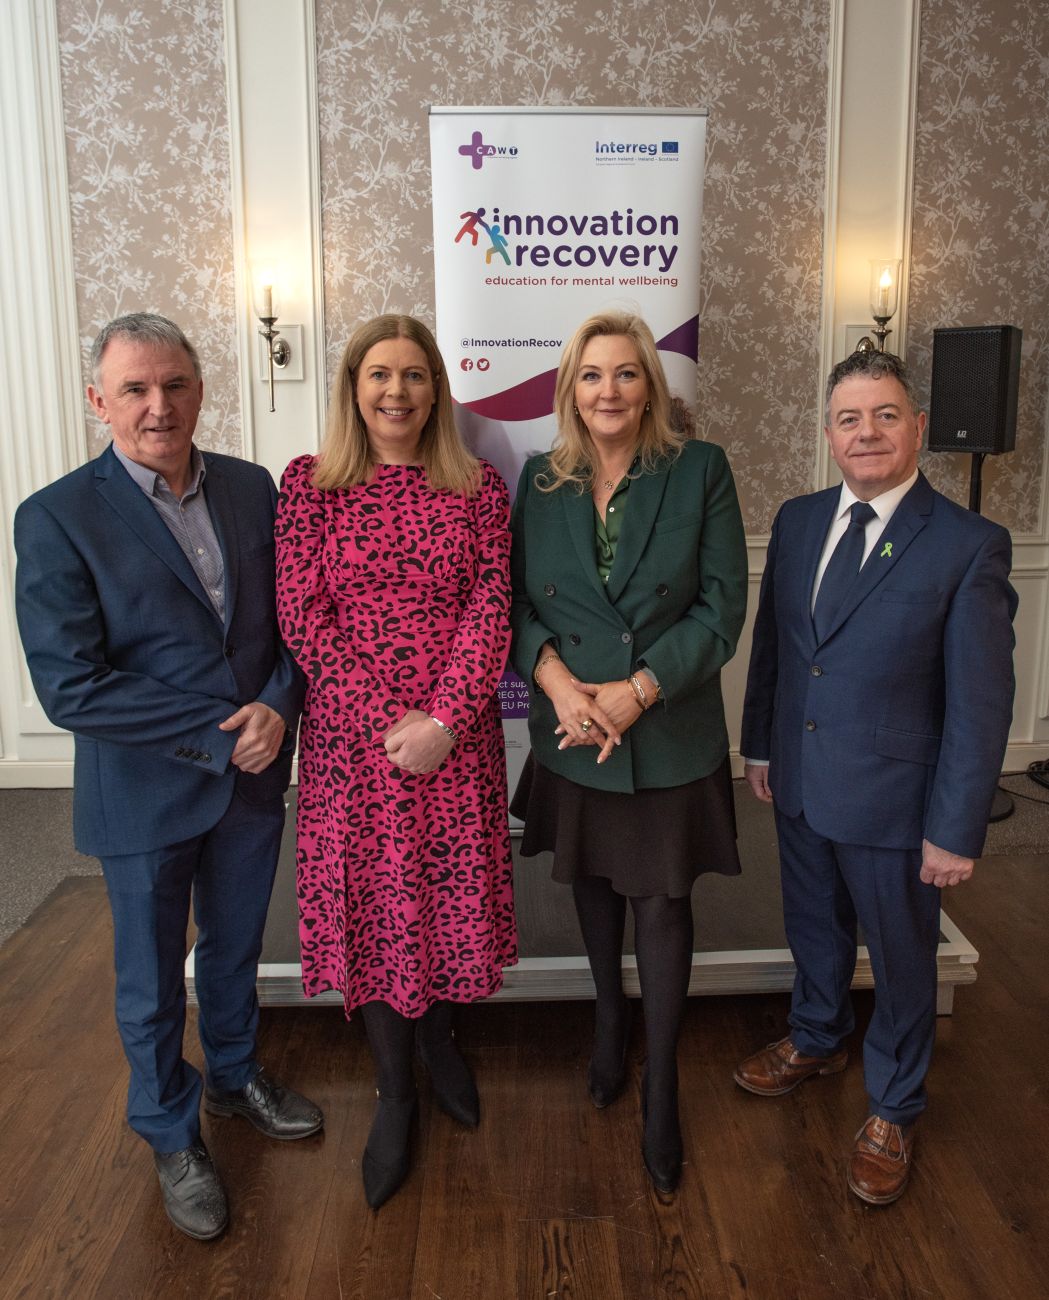 Pictured (L-R) Dermot Monaghan, Chief Officer at Community Healthcare HSE, Cathy McCloskey, Project Manager at CAWT, Gina McIntyre, Chief Executive at SEUPB and John Meehan, CAWT Partnership Project Chair.